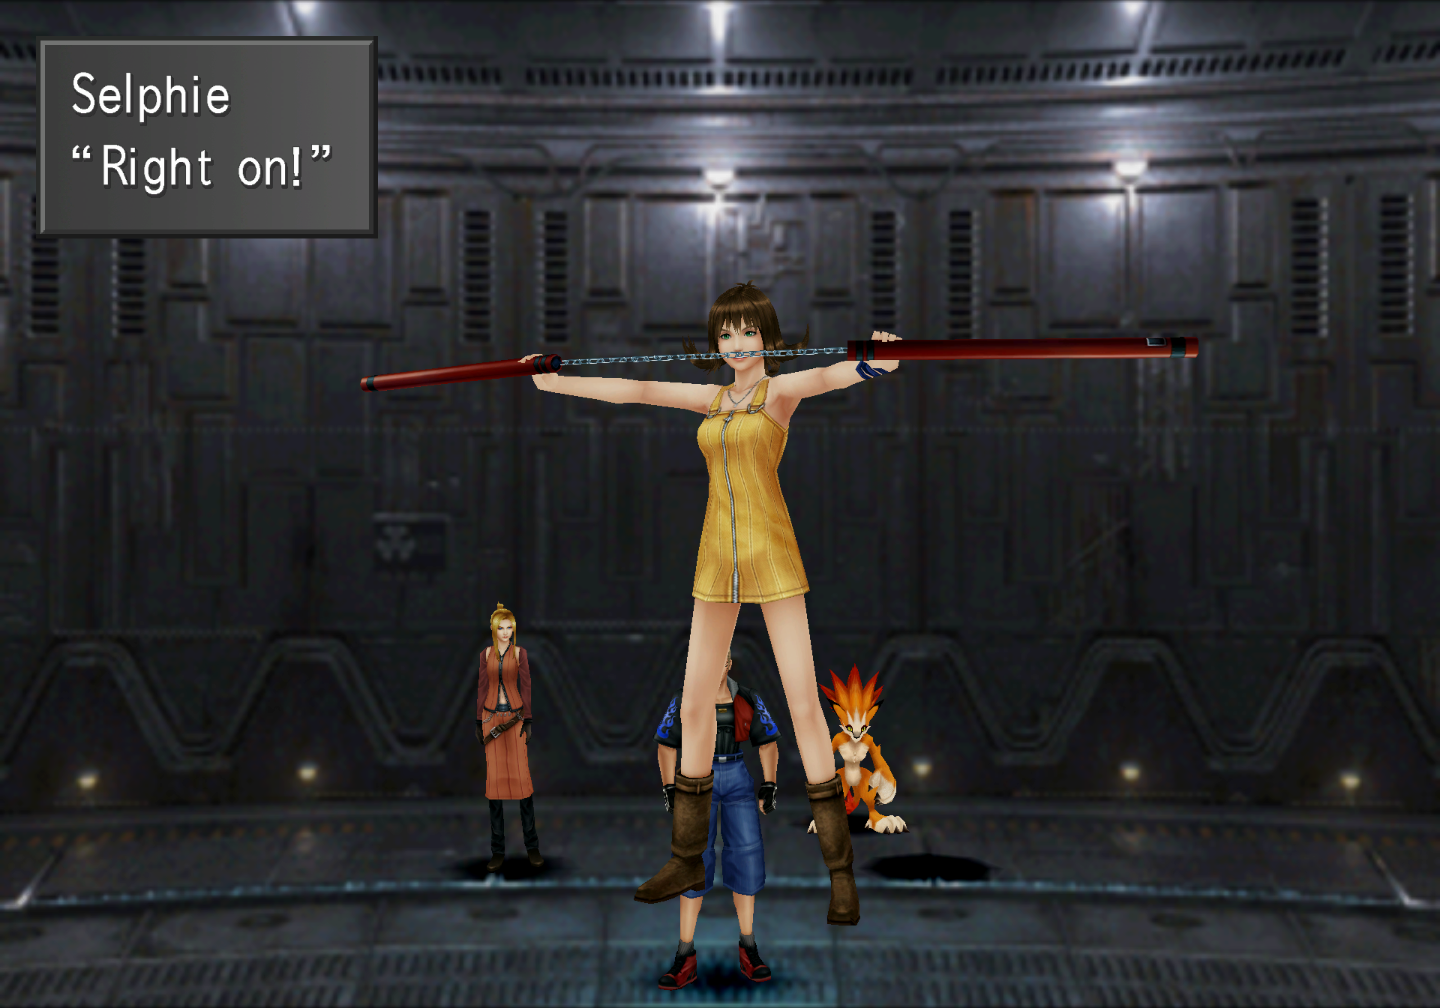 Selphie in the D-District Prison, made twice as tall for effect. She says "Right on!" while posing with nunchucks.